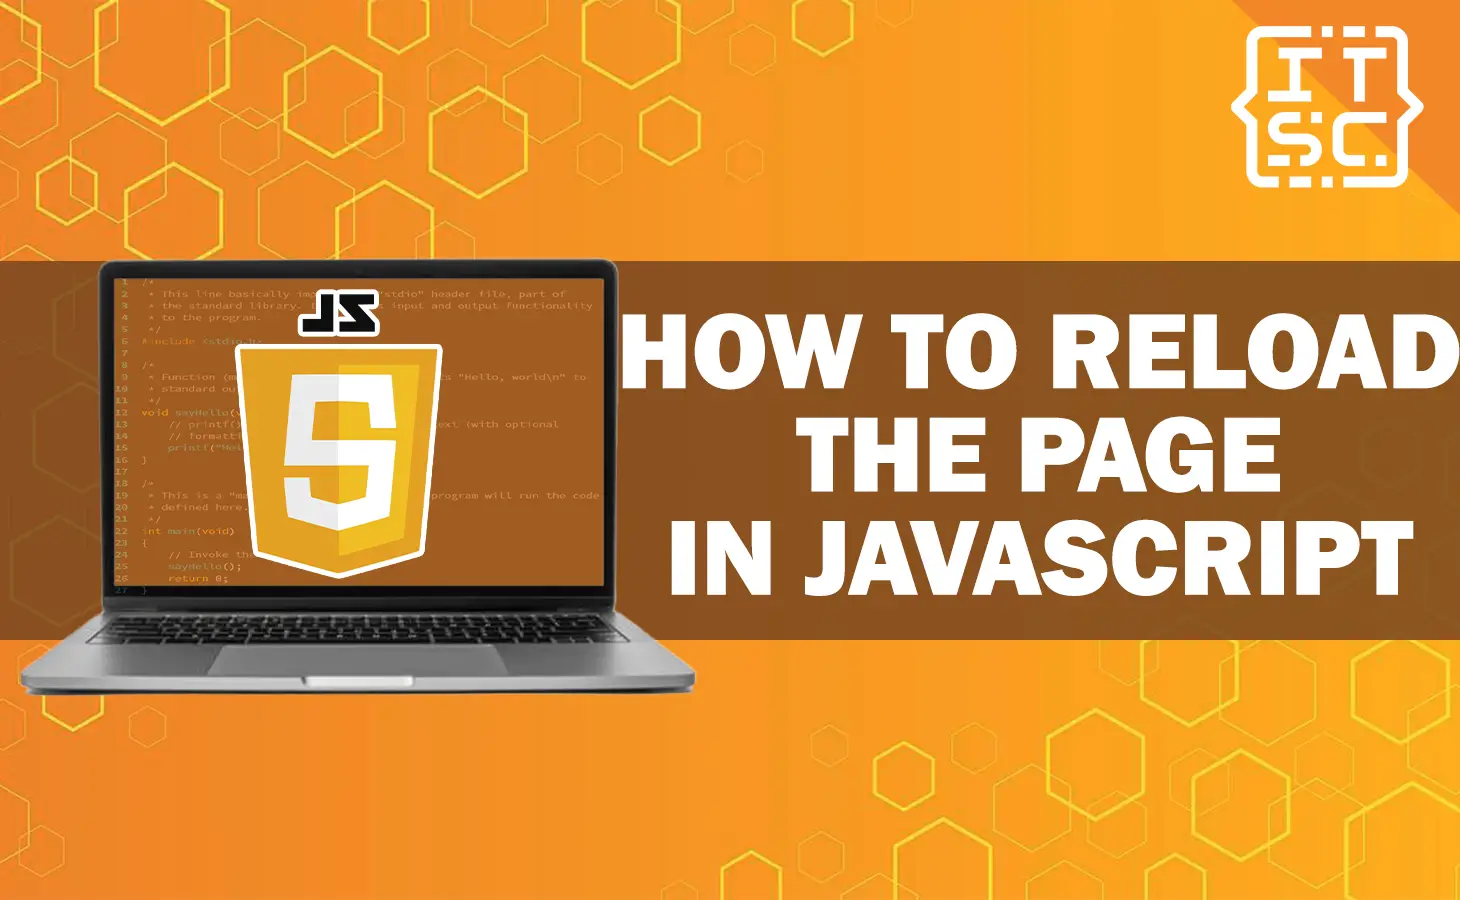 How to Reload the Page in JavaScript